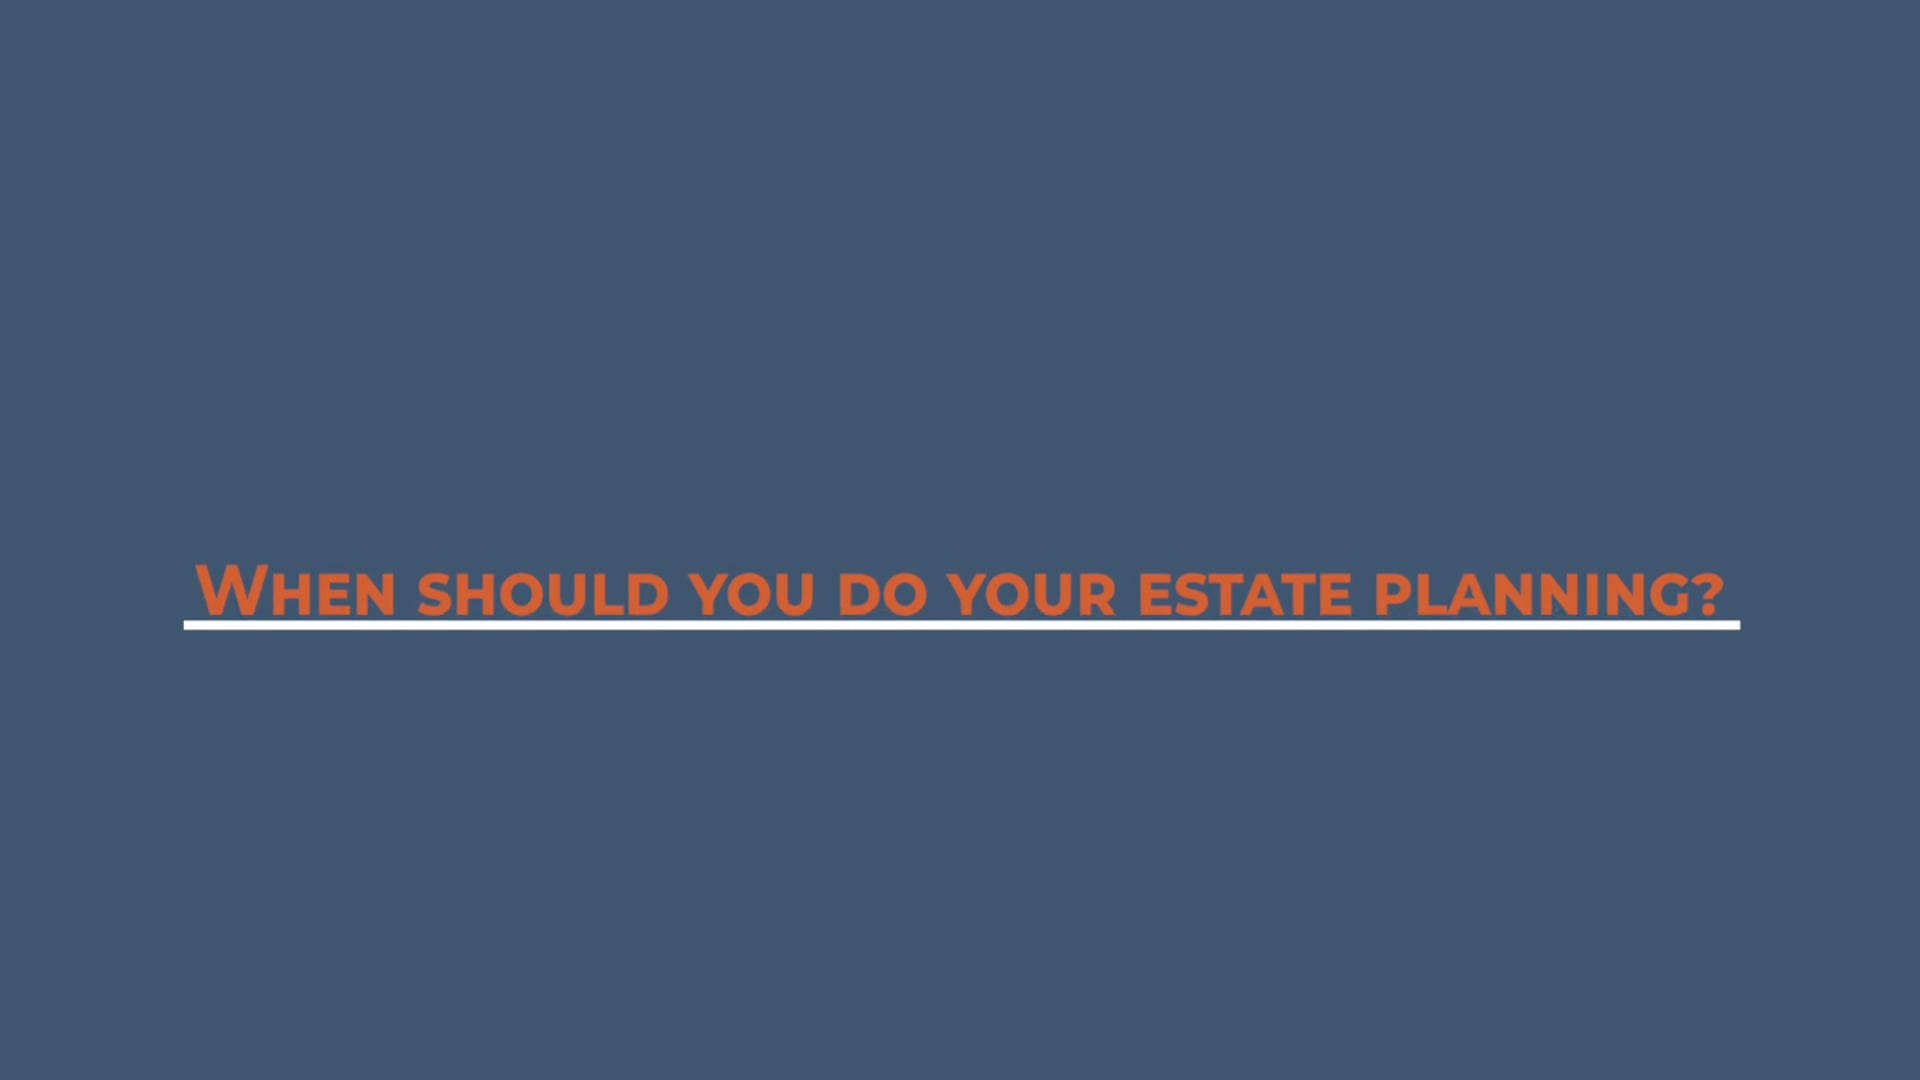 When Should You Do Your Estate Planning?